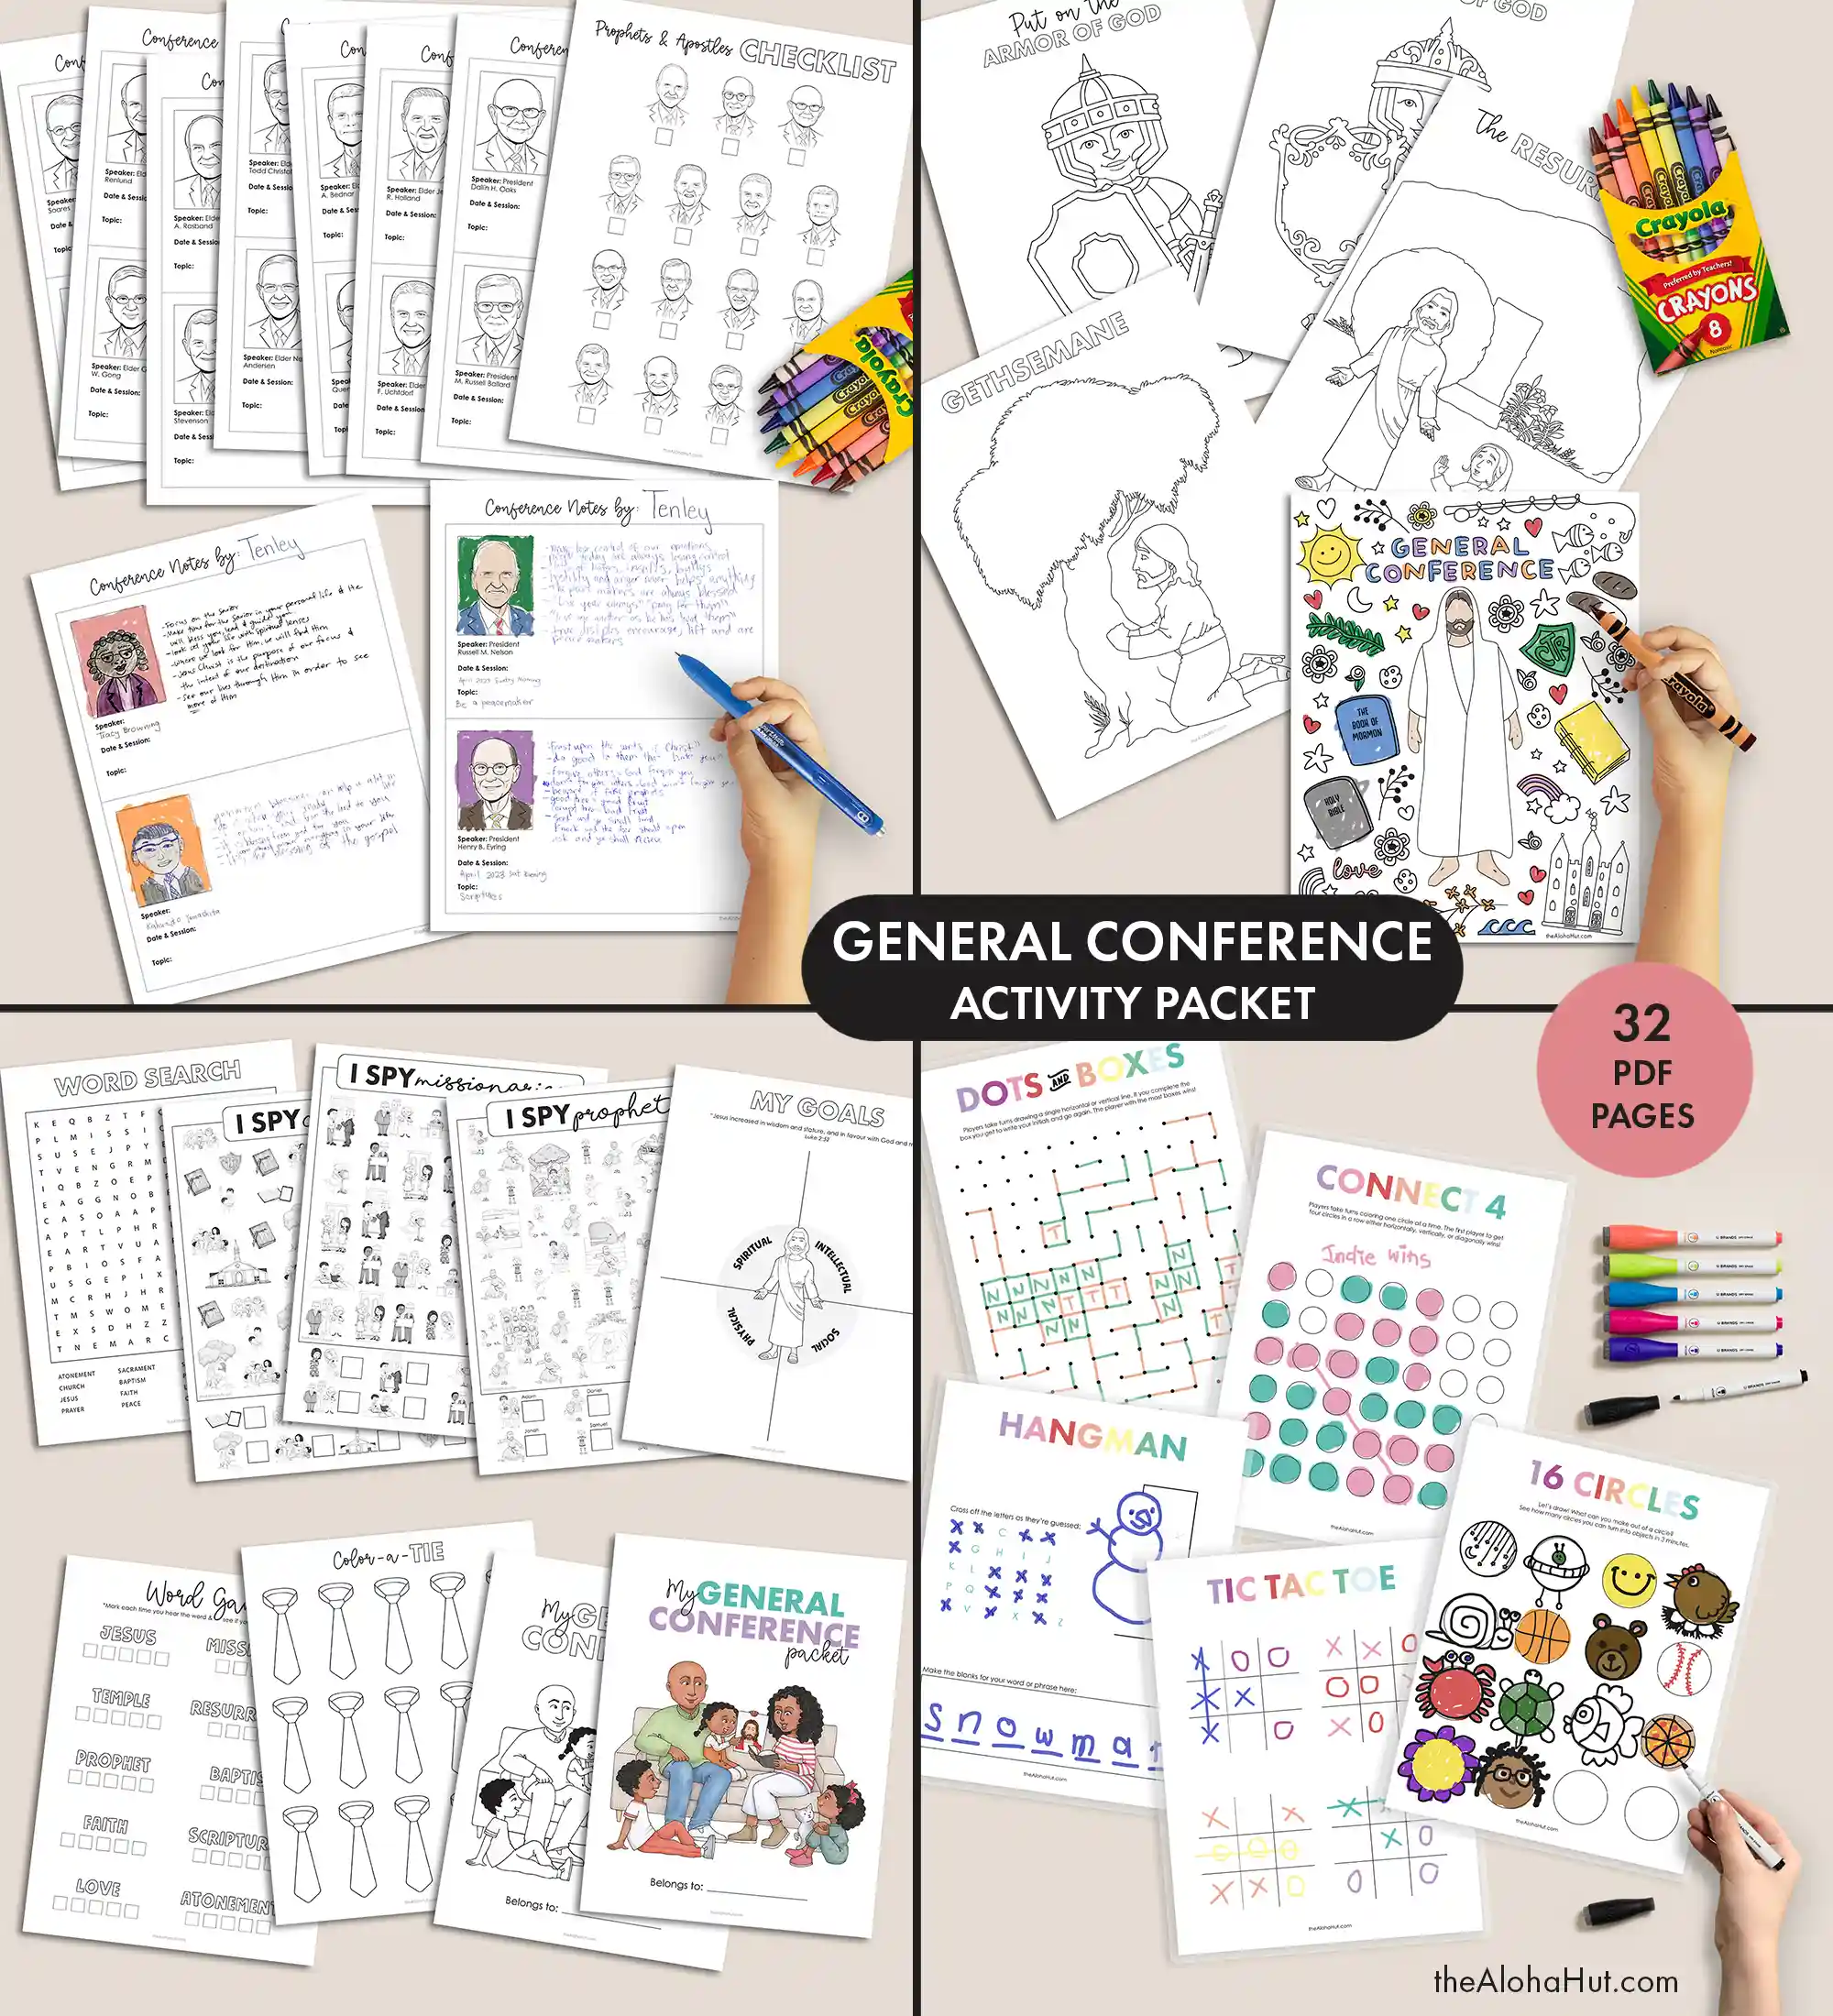 General Conference Traditions - General Conference Ideas & Activities for Families